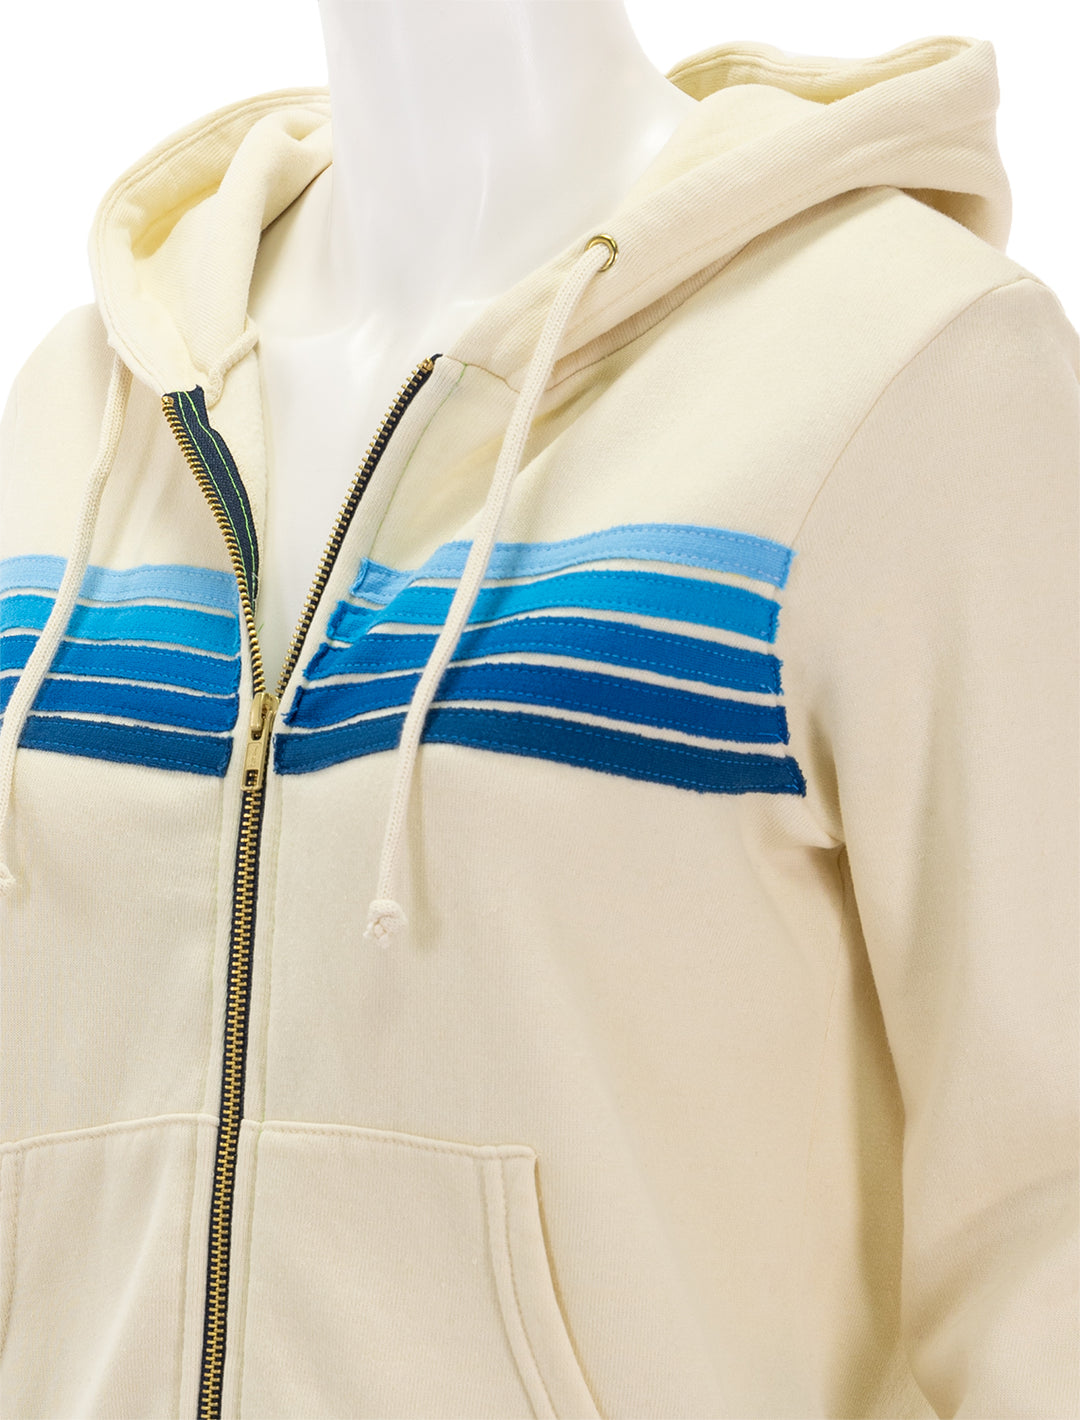 Close-up view of Aviator Nation's 5 stripe zip hoodie in vintage white and blue.